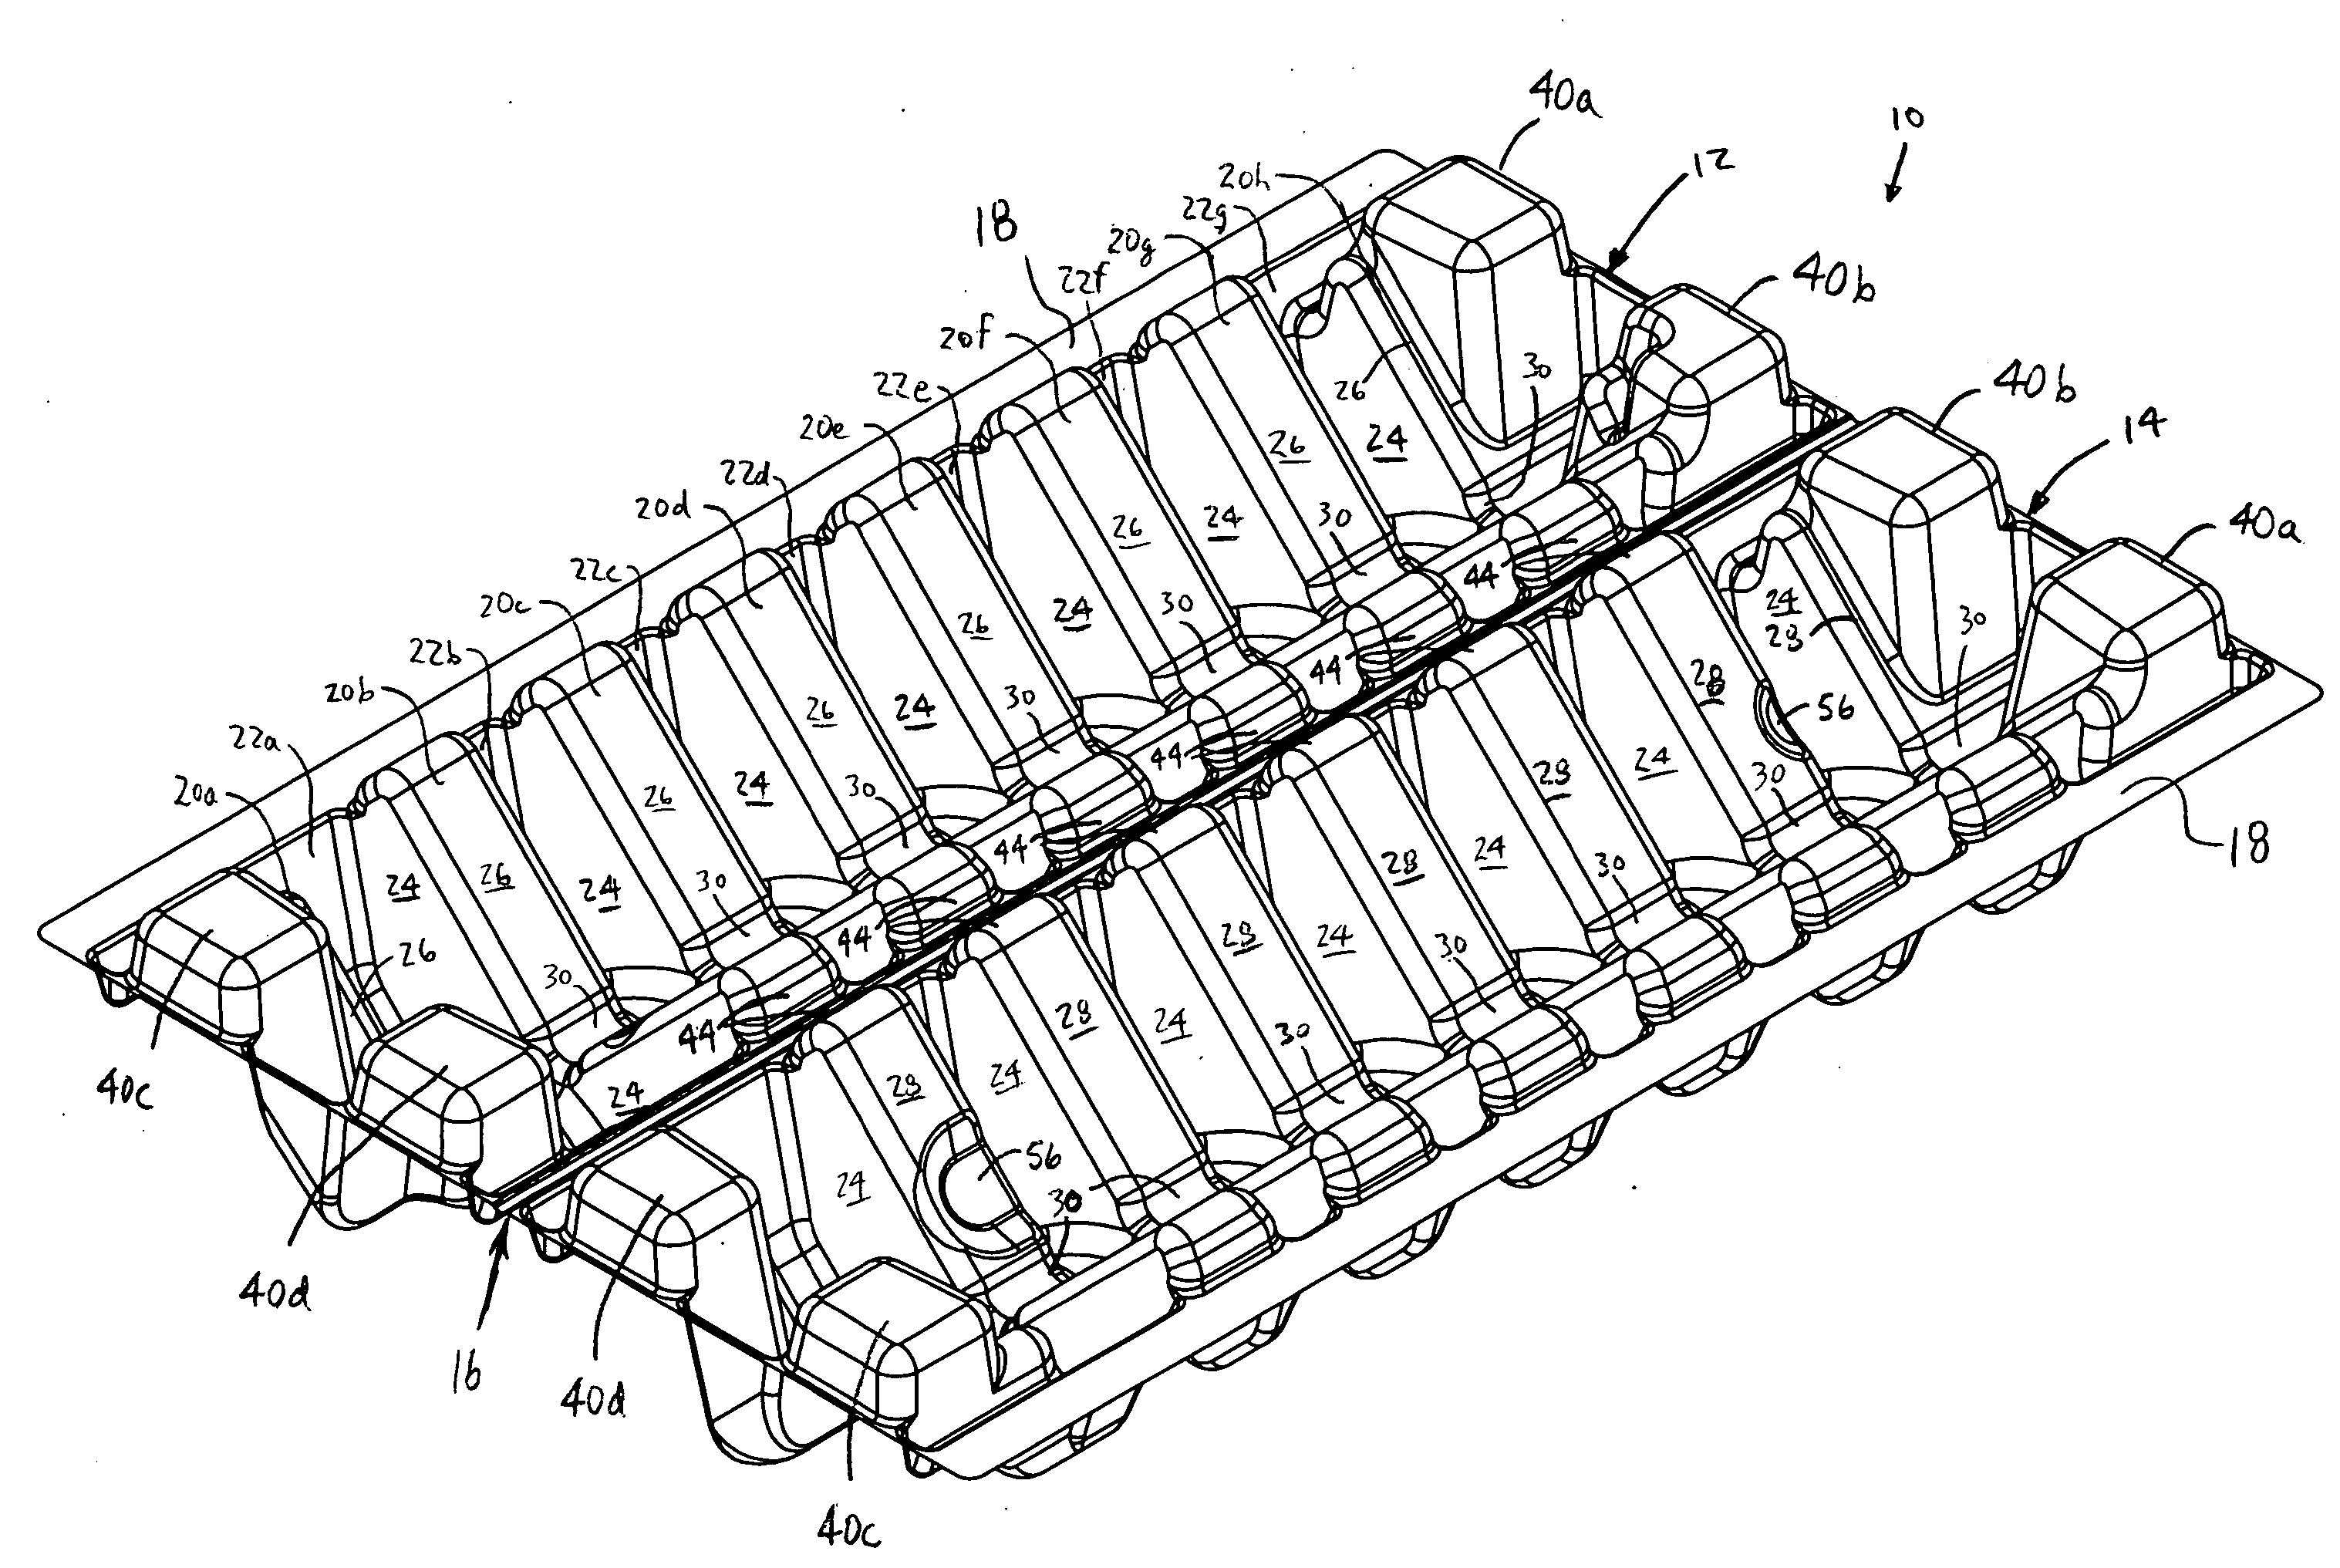 Articulating dunnage and method of use